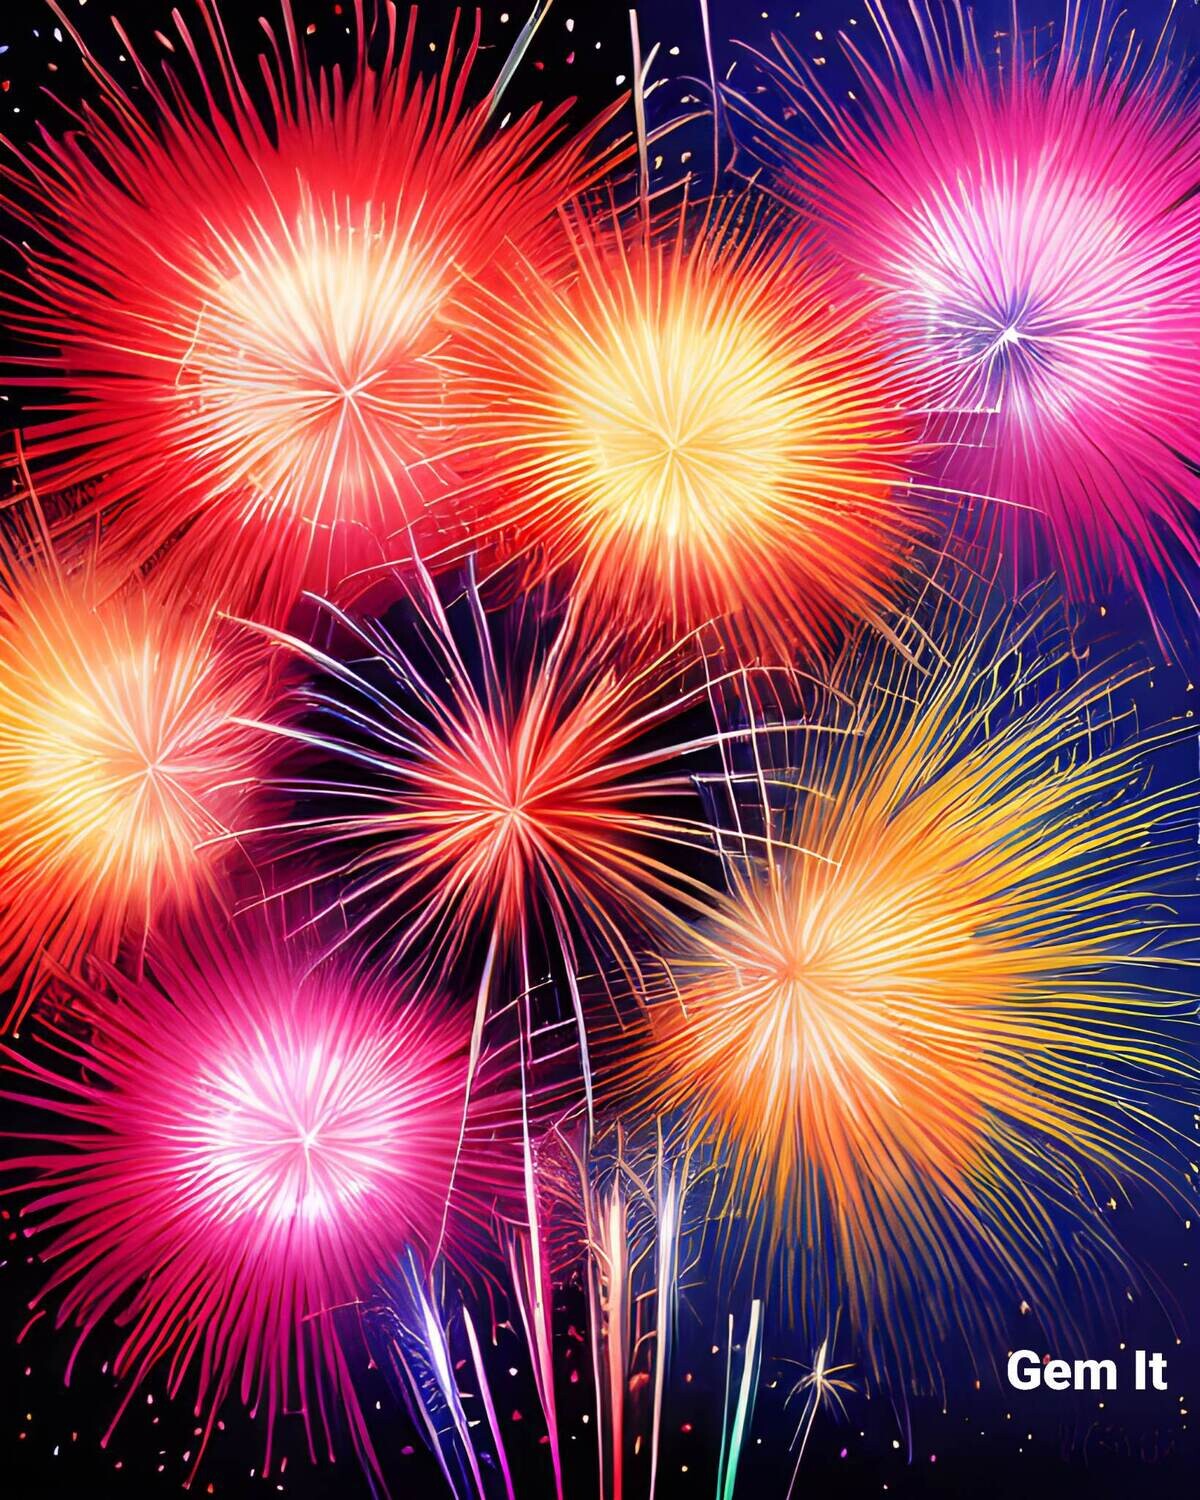 Fireworks 1 - Specially ordered for you. Delivery is approximately 4 - 6 weeks.